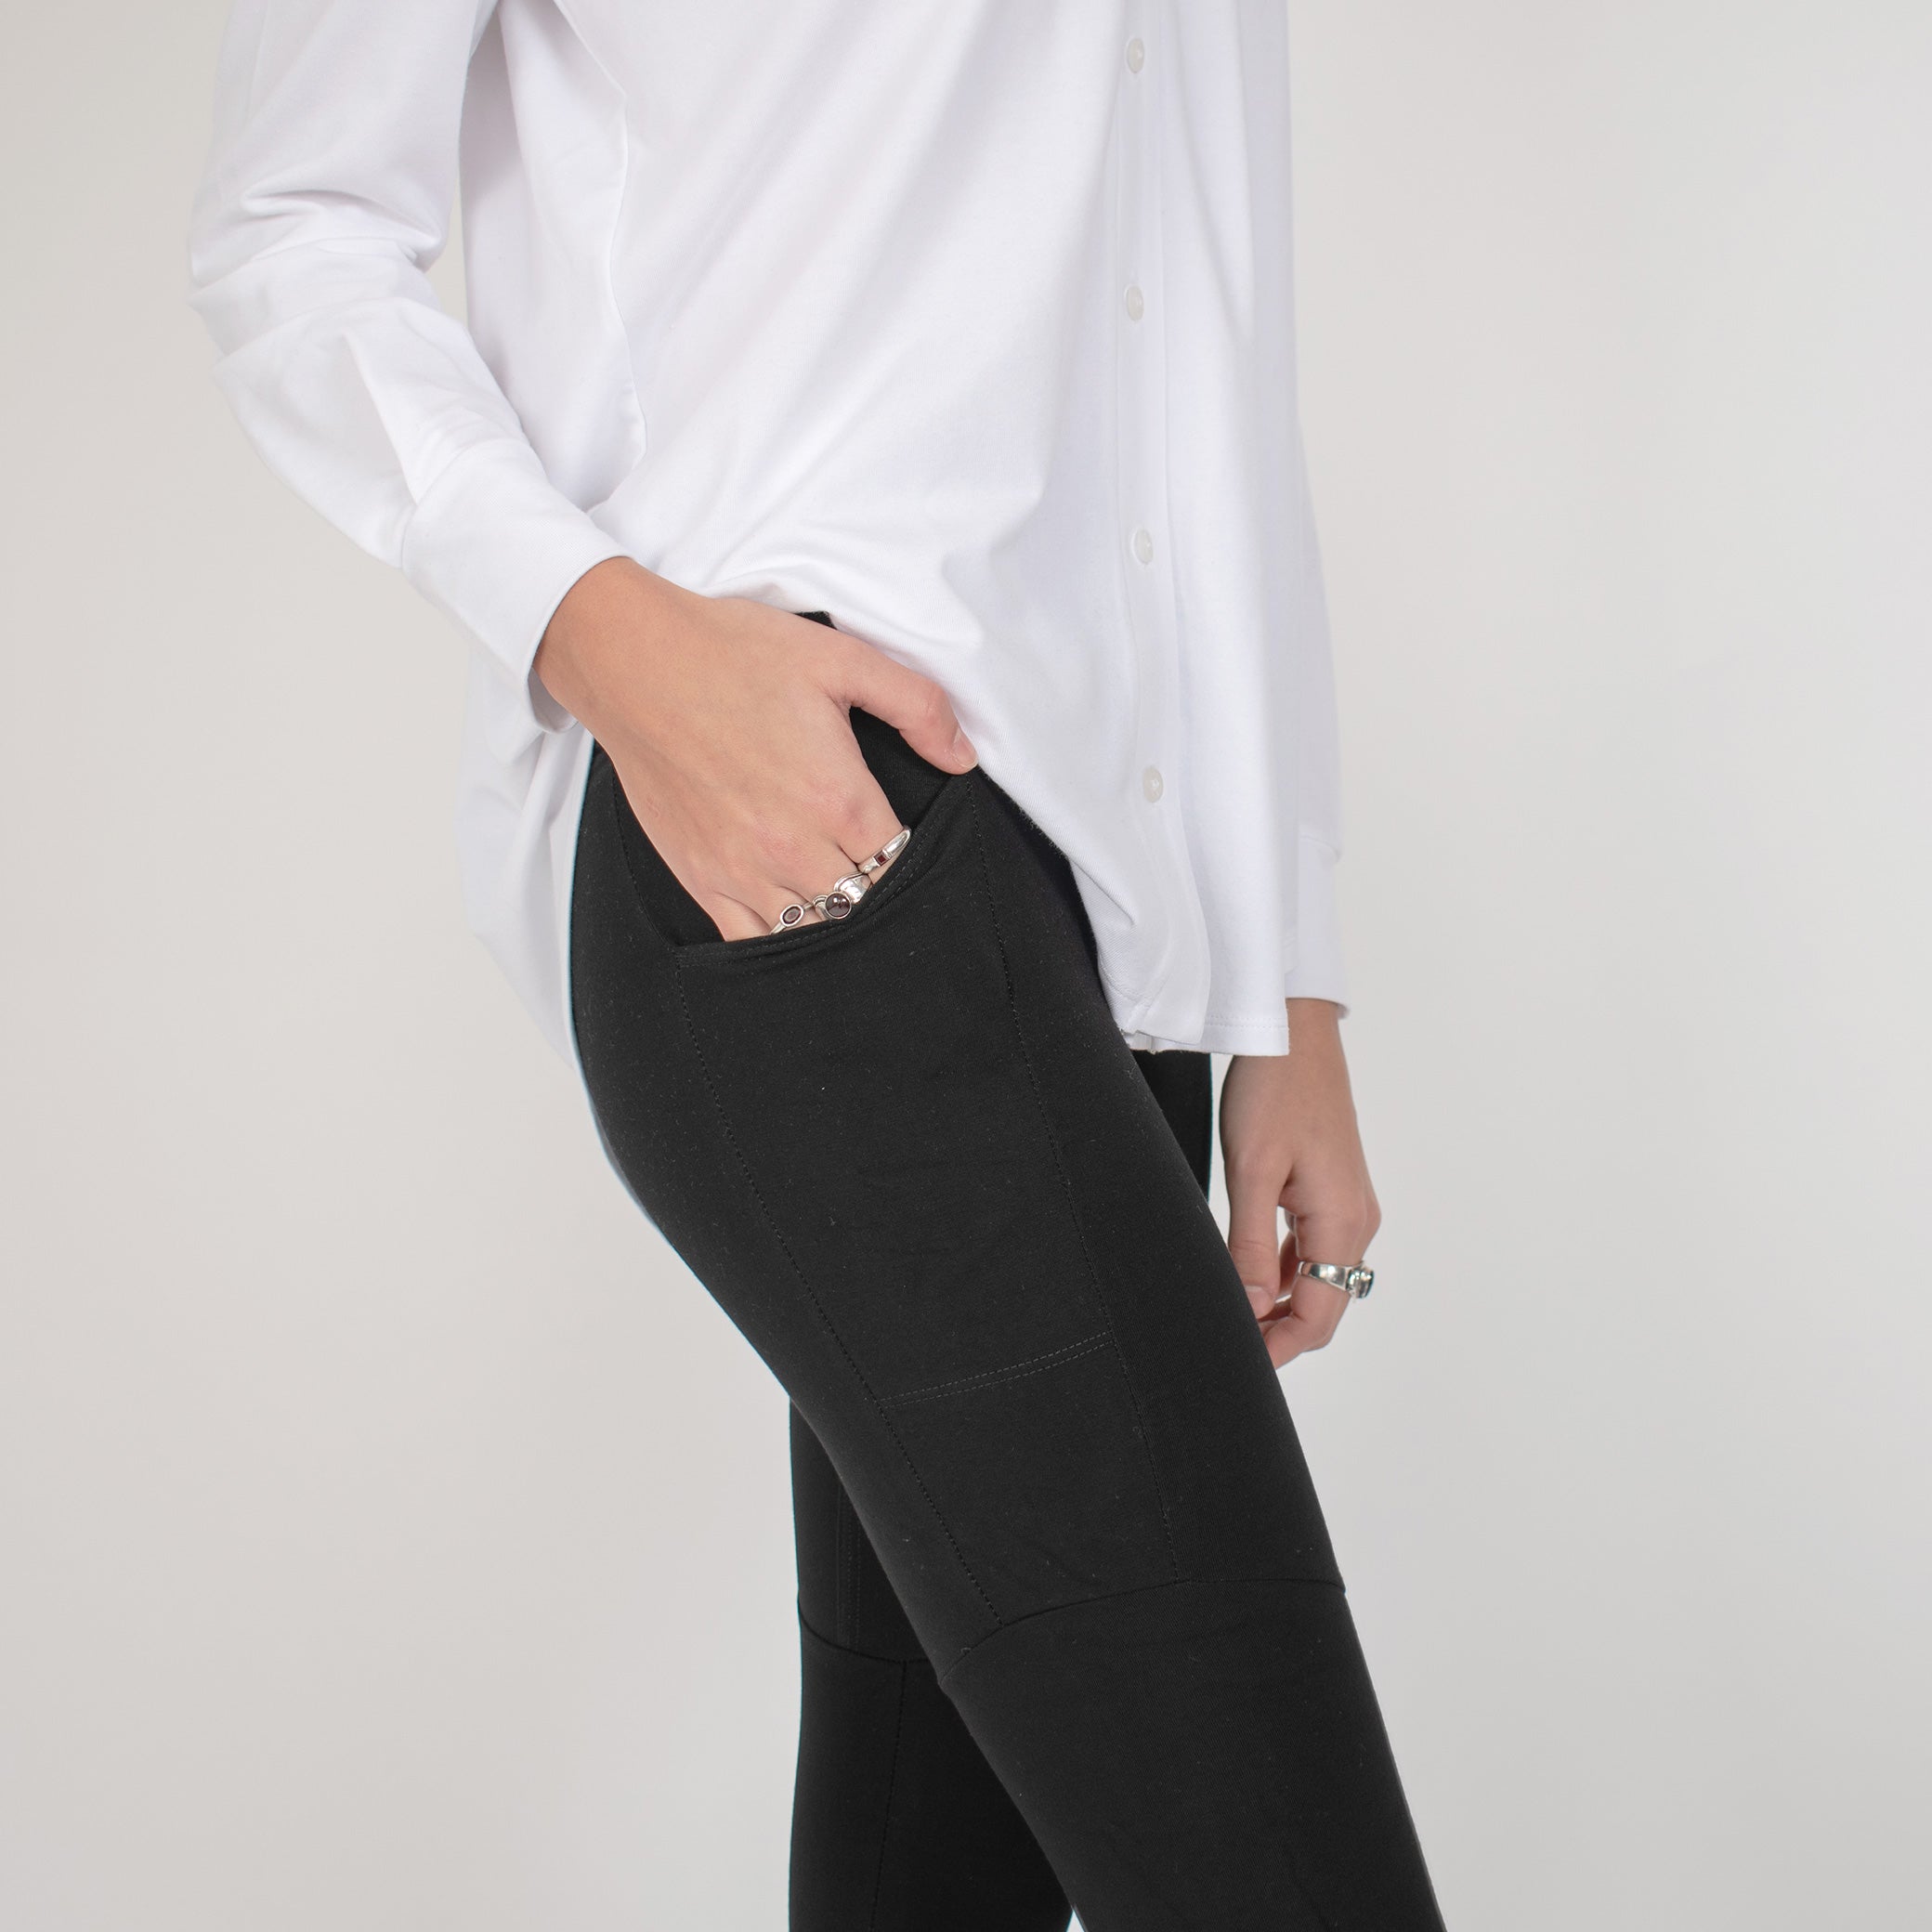 Edel's Boutique - InWear leggings with a timeless clean